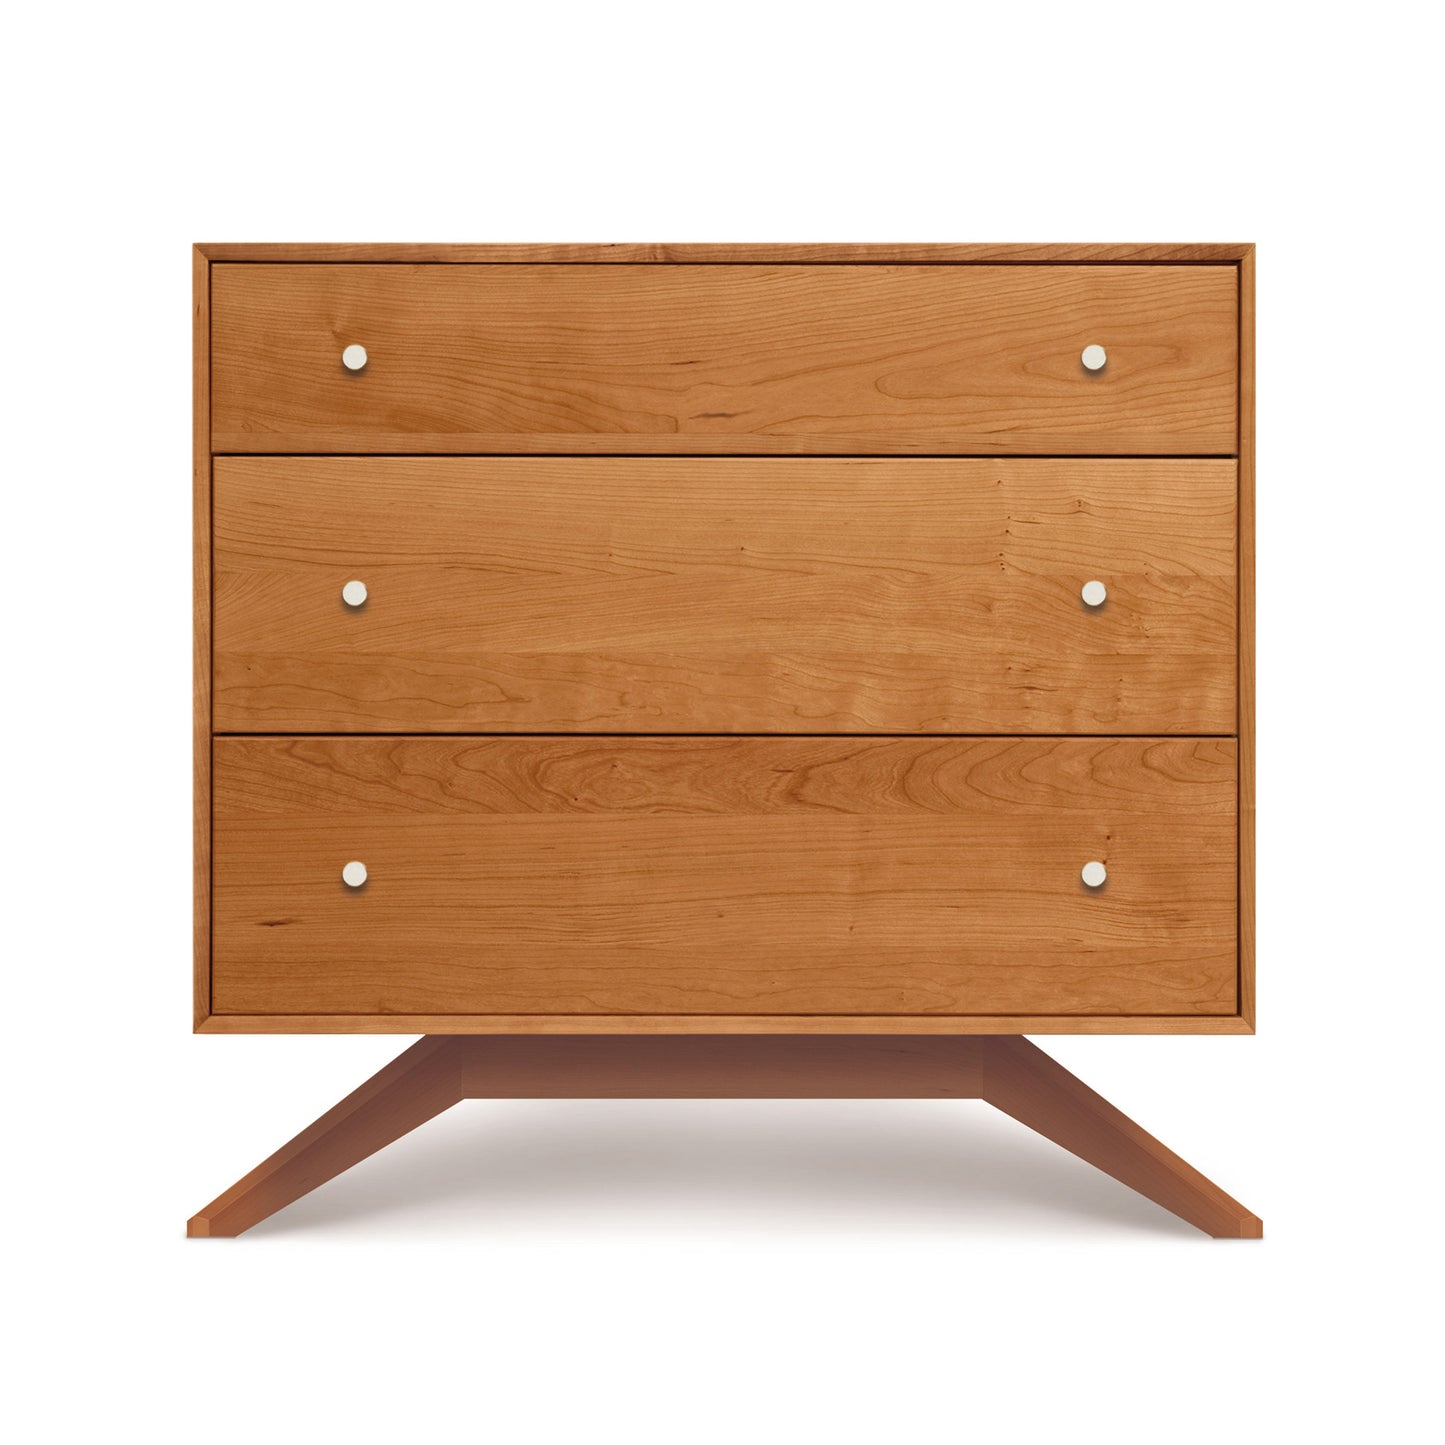 An eco-friendly wooden chest of drawers, the Astrid 3-Drawer Chest from Copeland Furniture, showcased against a clean white background.